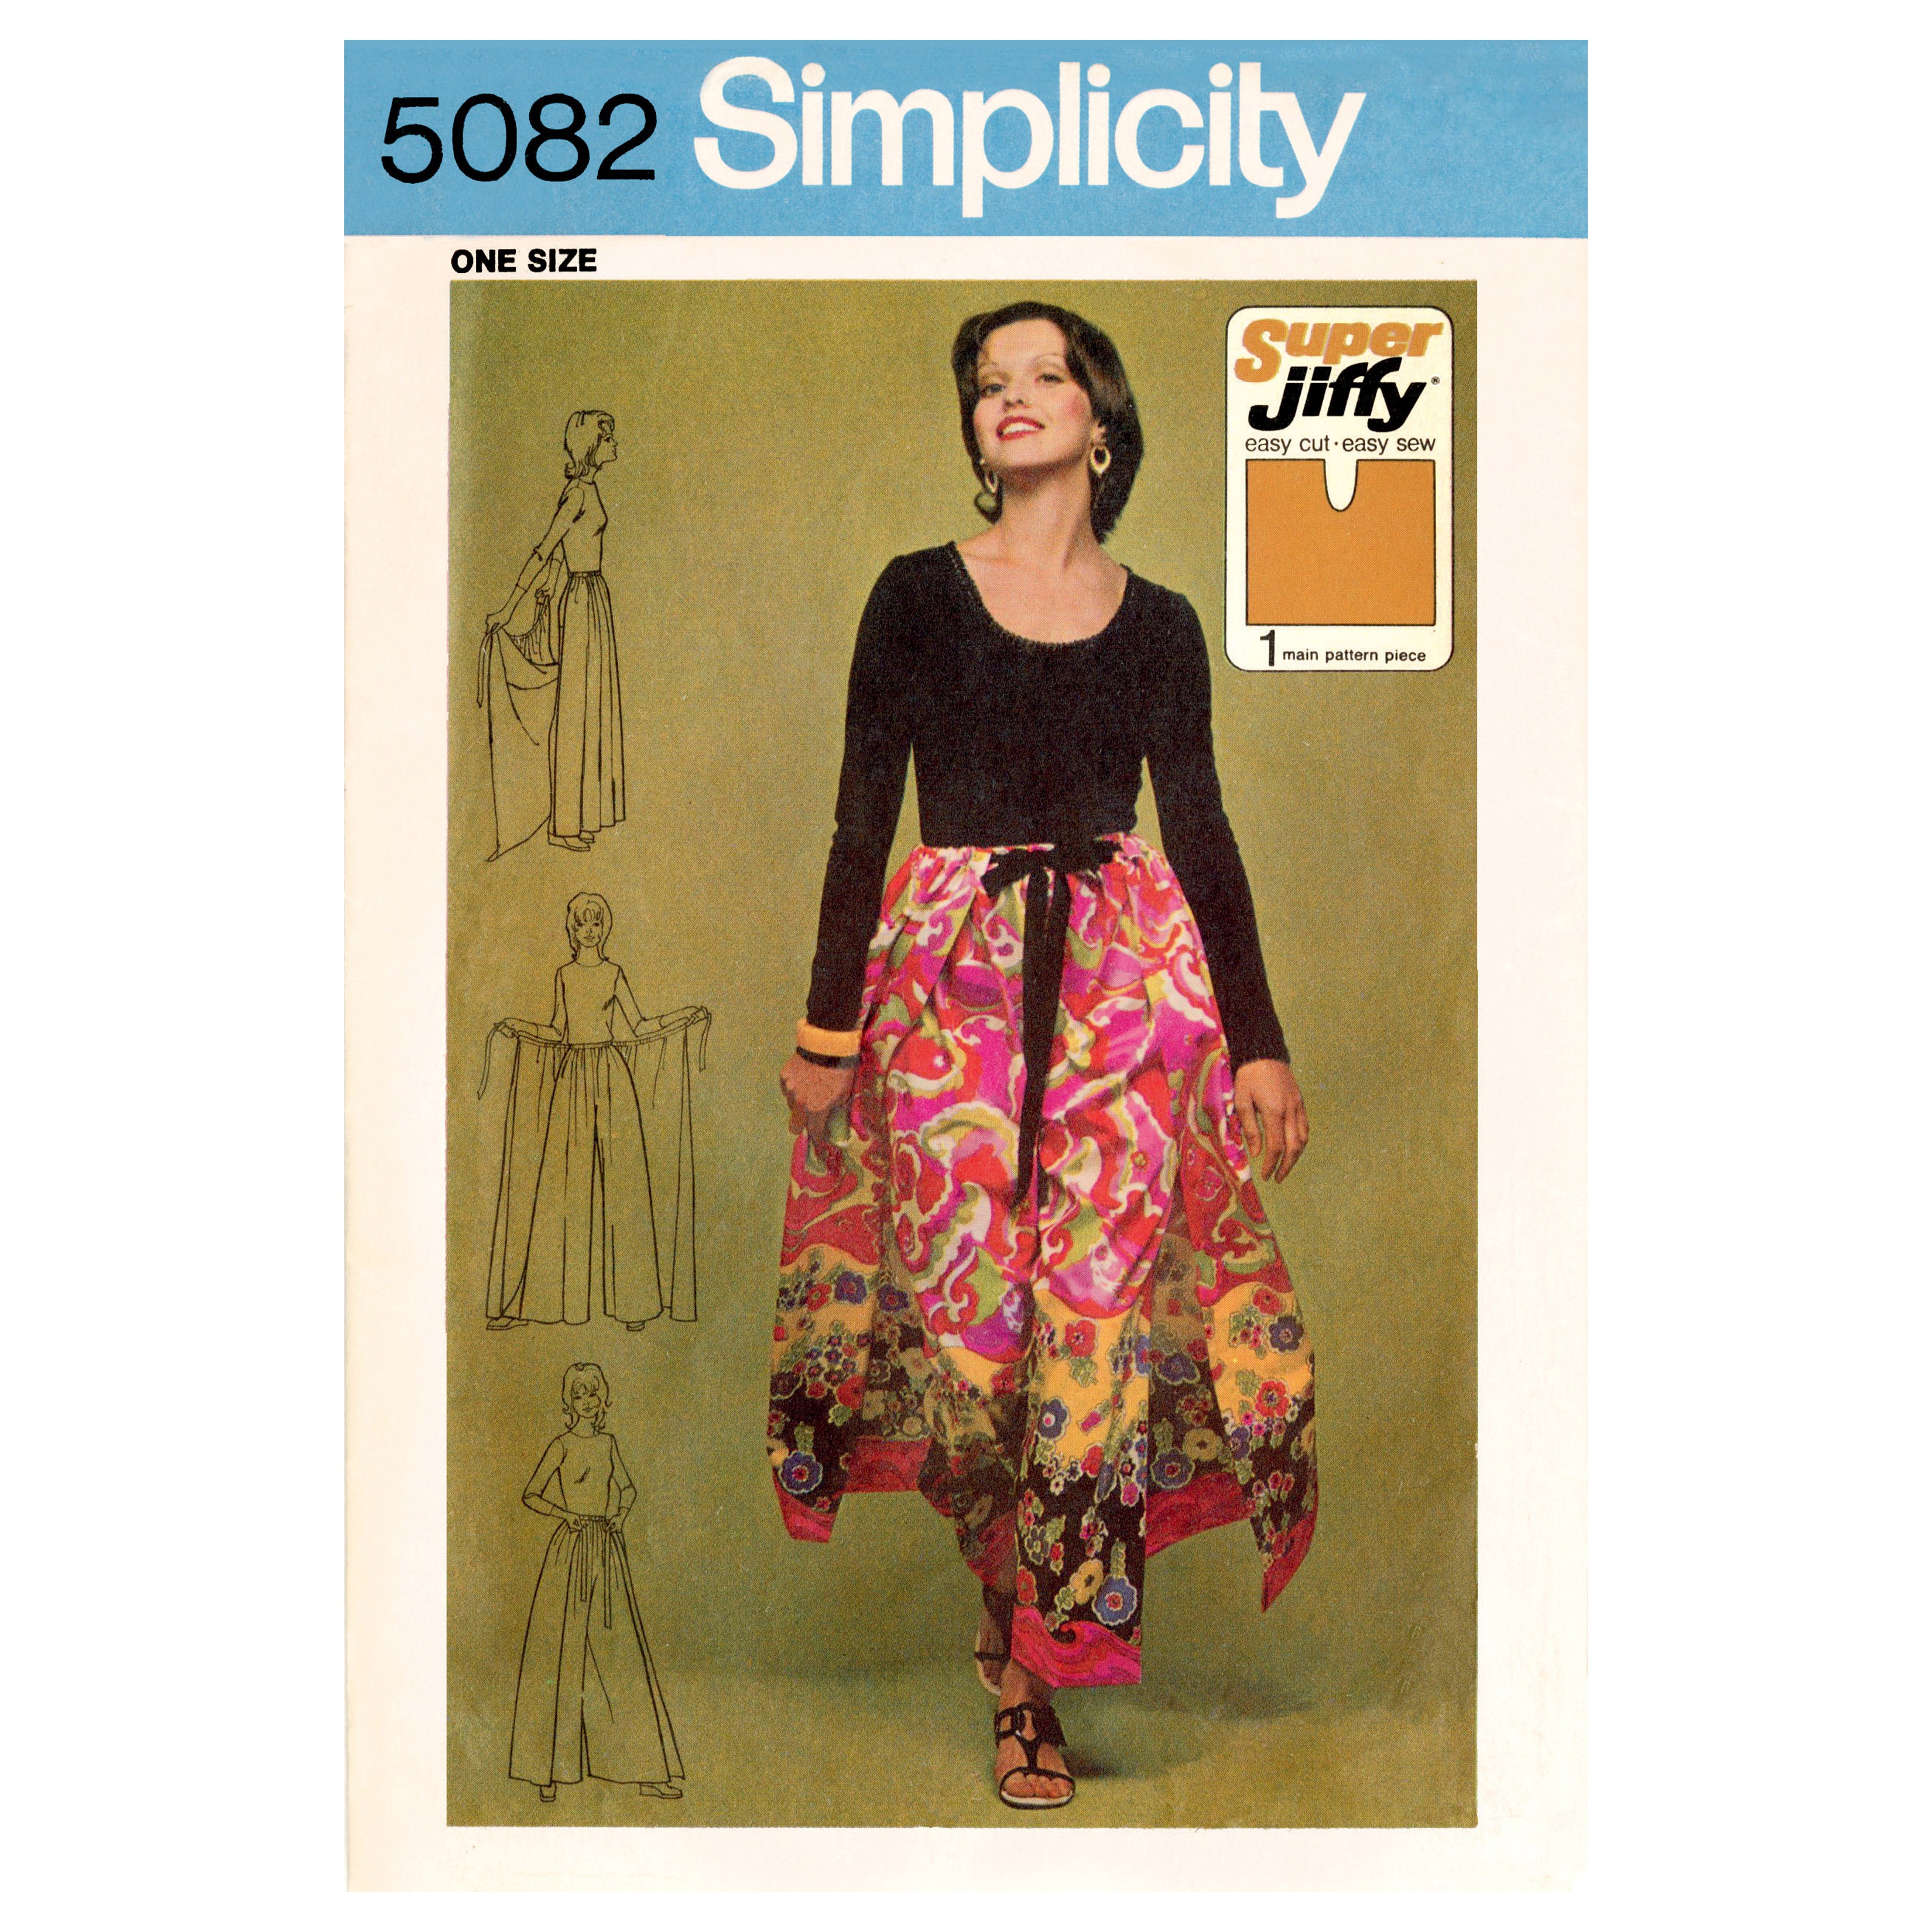 Simplicity Sewing Pattern 9595 Misses' Super Jiffy Wrap and Tie Pantskirt from Jaycotts Sewing Supplies